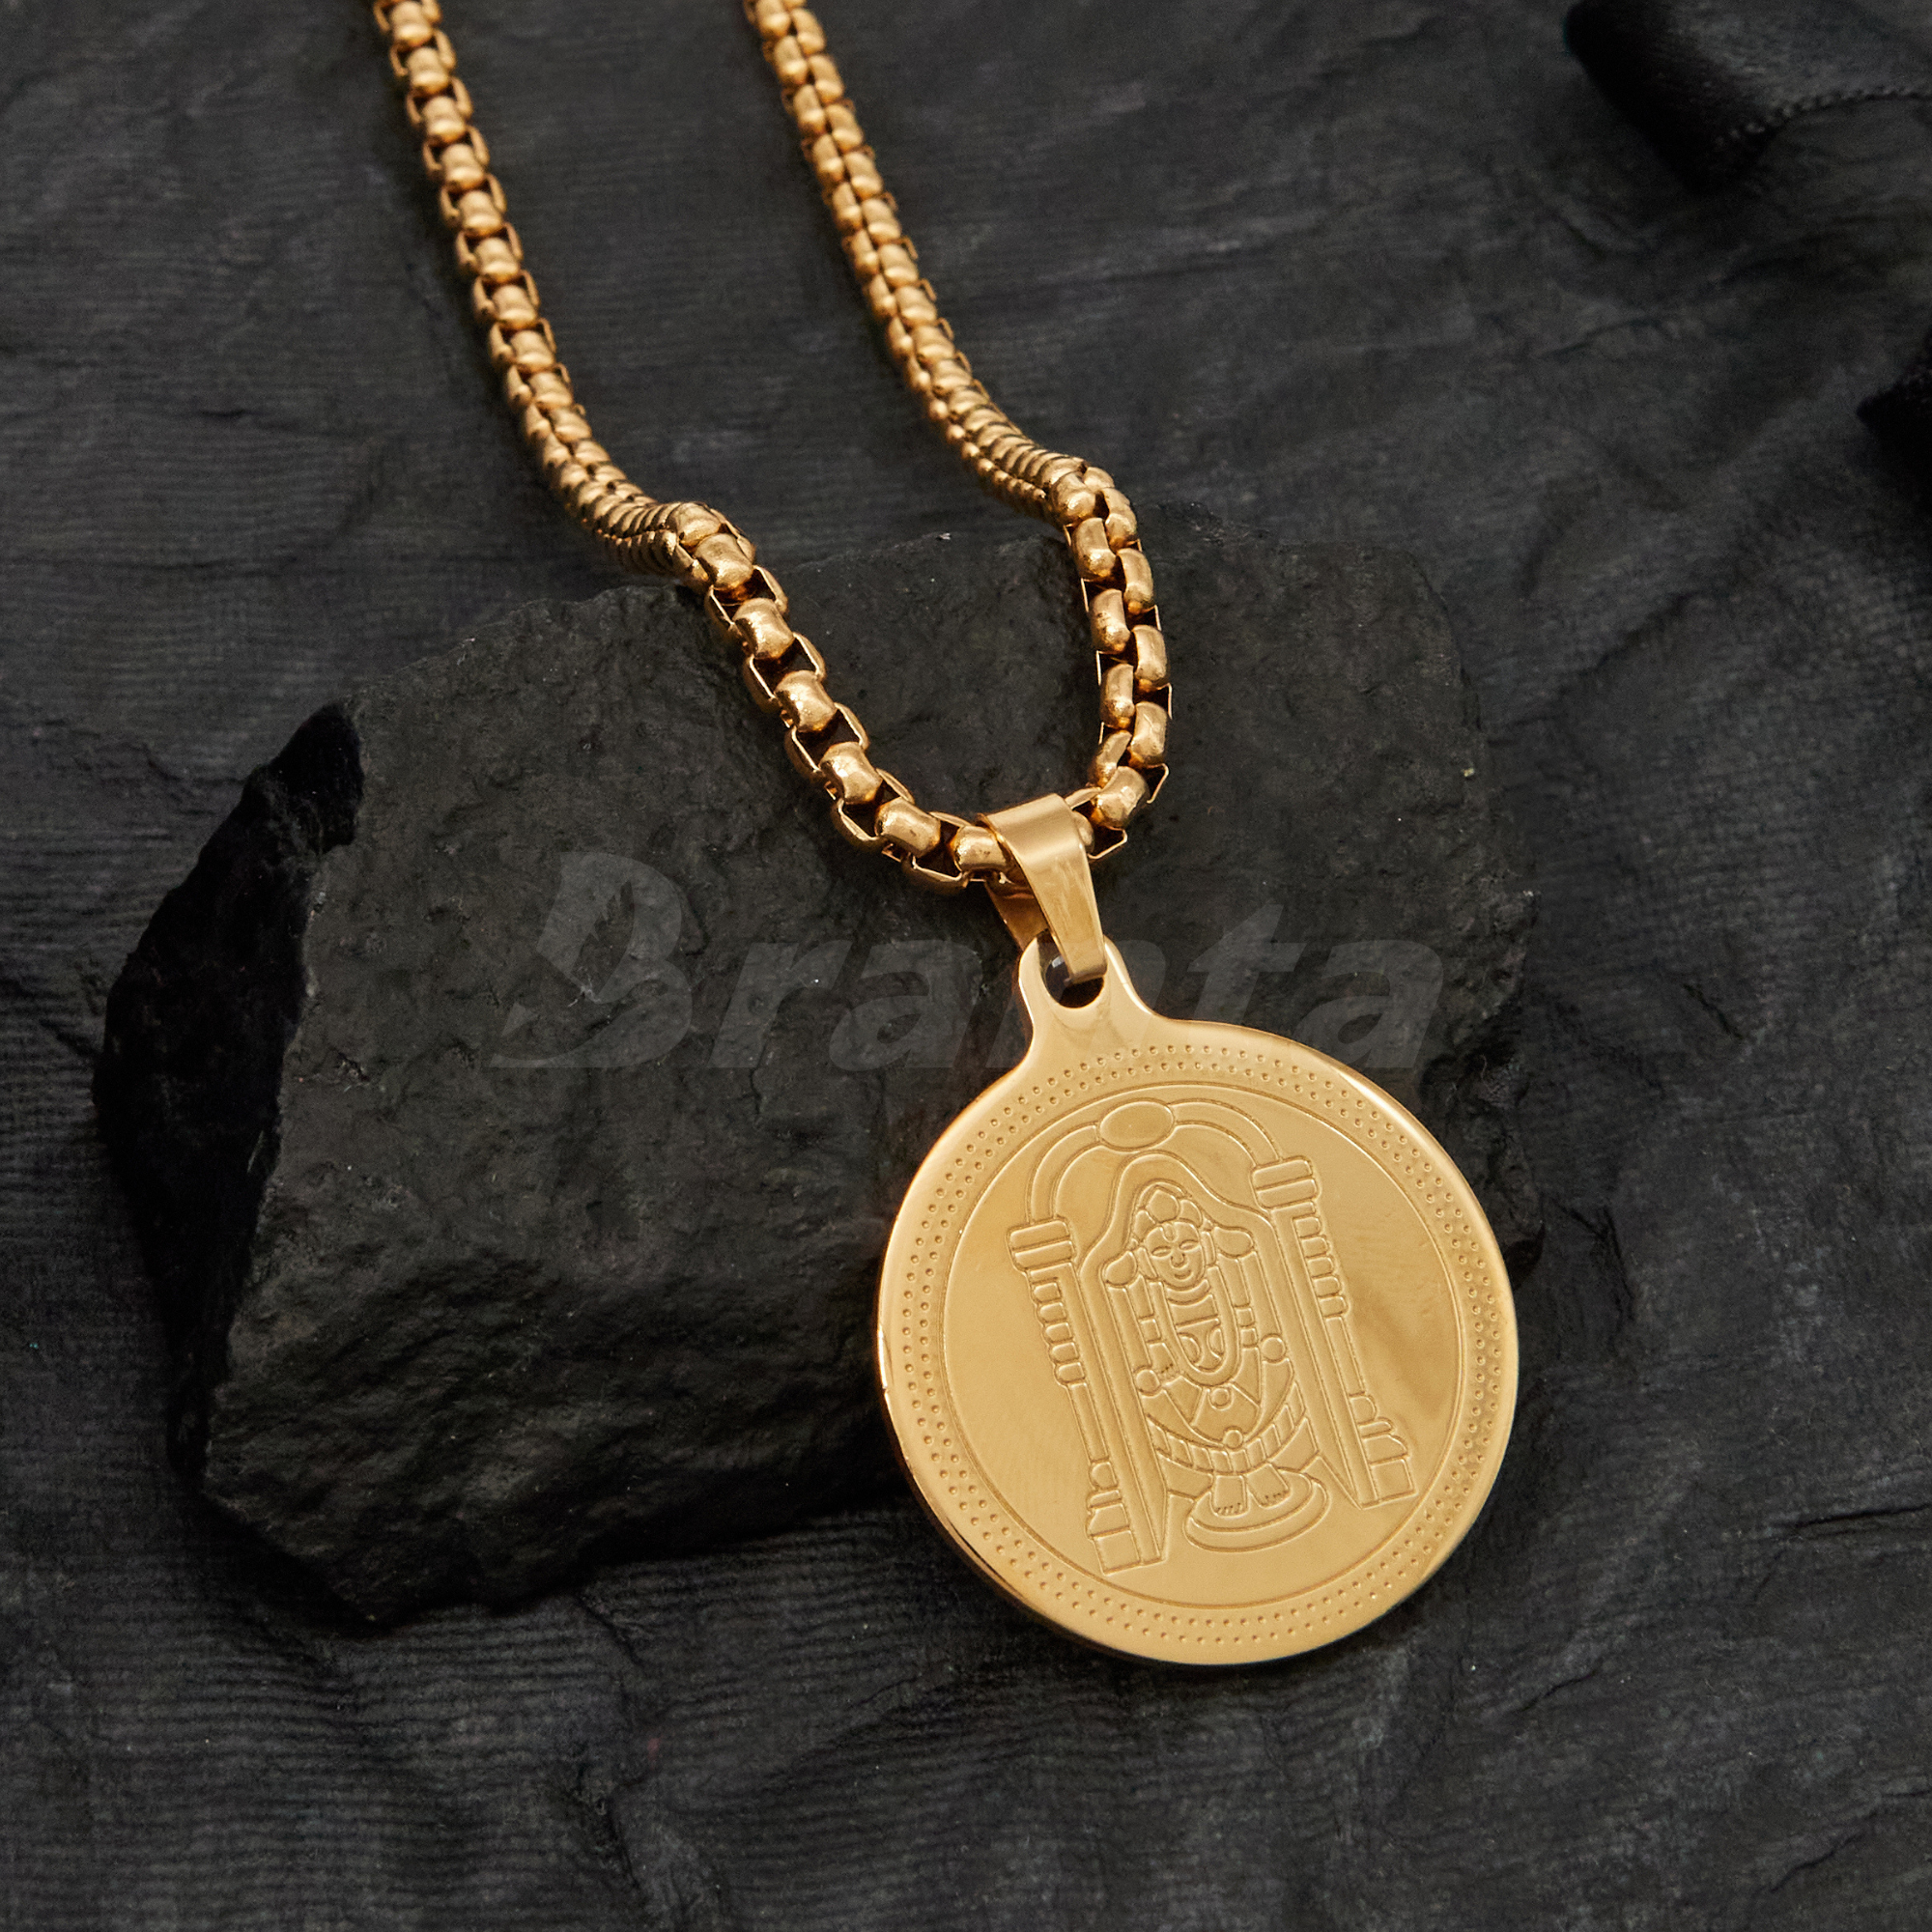 Traditional Majestic Gold Pendant With Chain